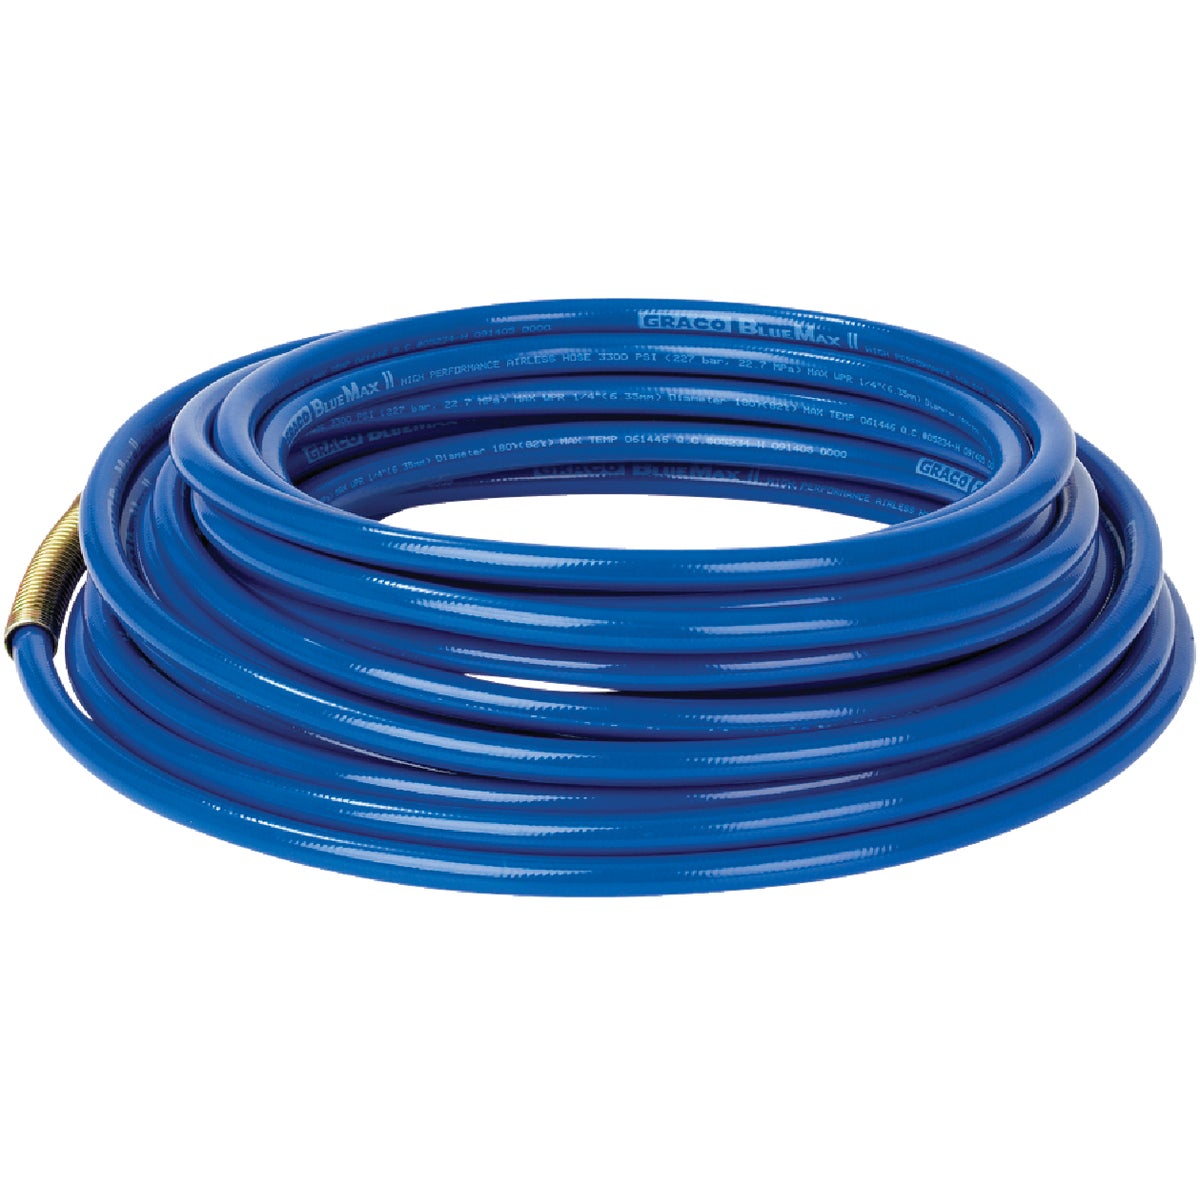 Graco Blue Max II 1/4 In. x 50 Ft. 3300 PSI Airless Spray Hose